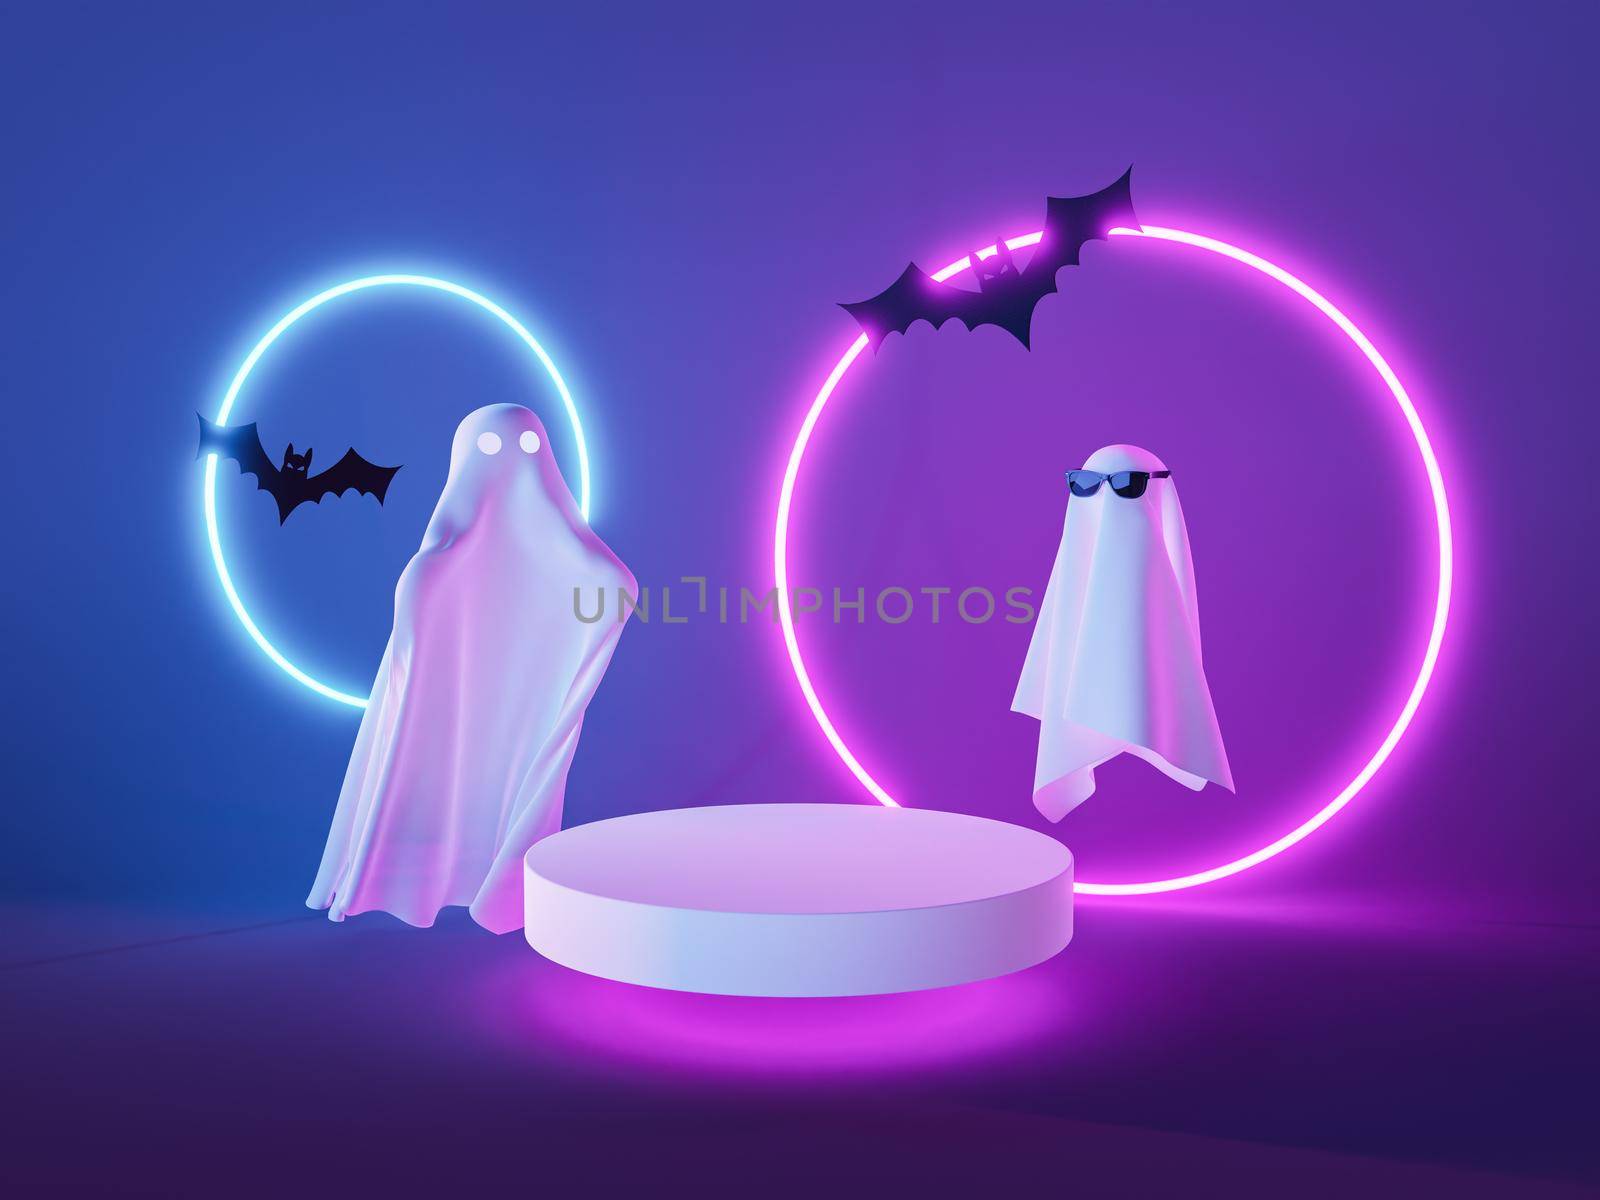 3D rendering of spooky white ghosts with black bats flying near illuminated neon ring lamps and stand against purple background